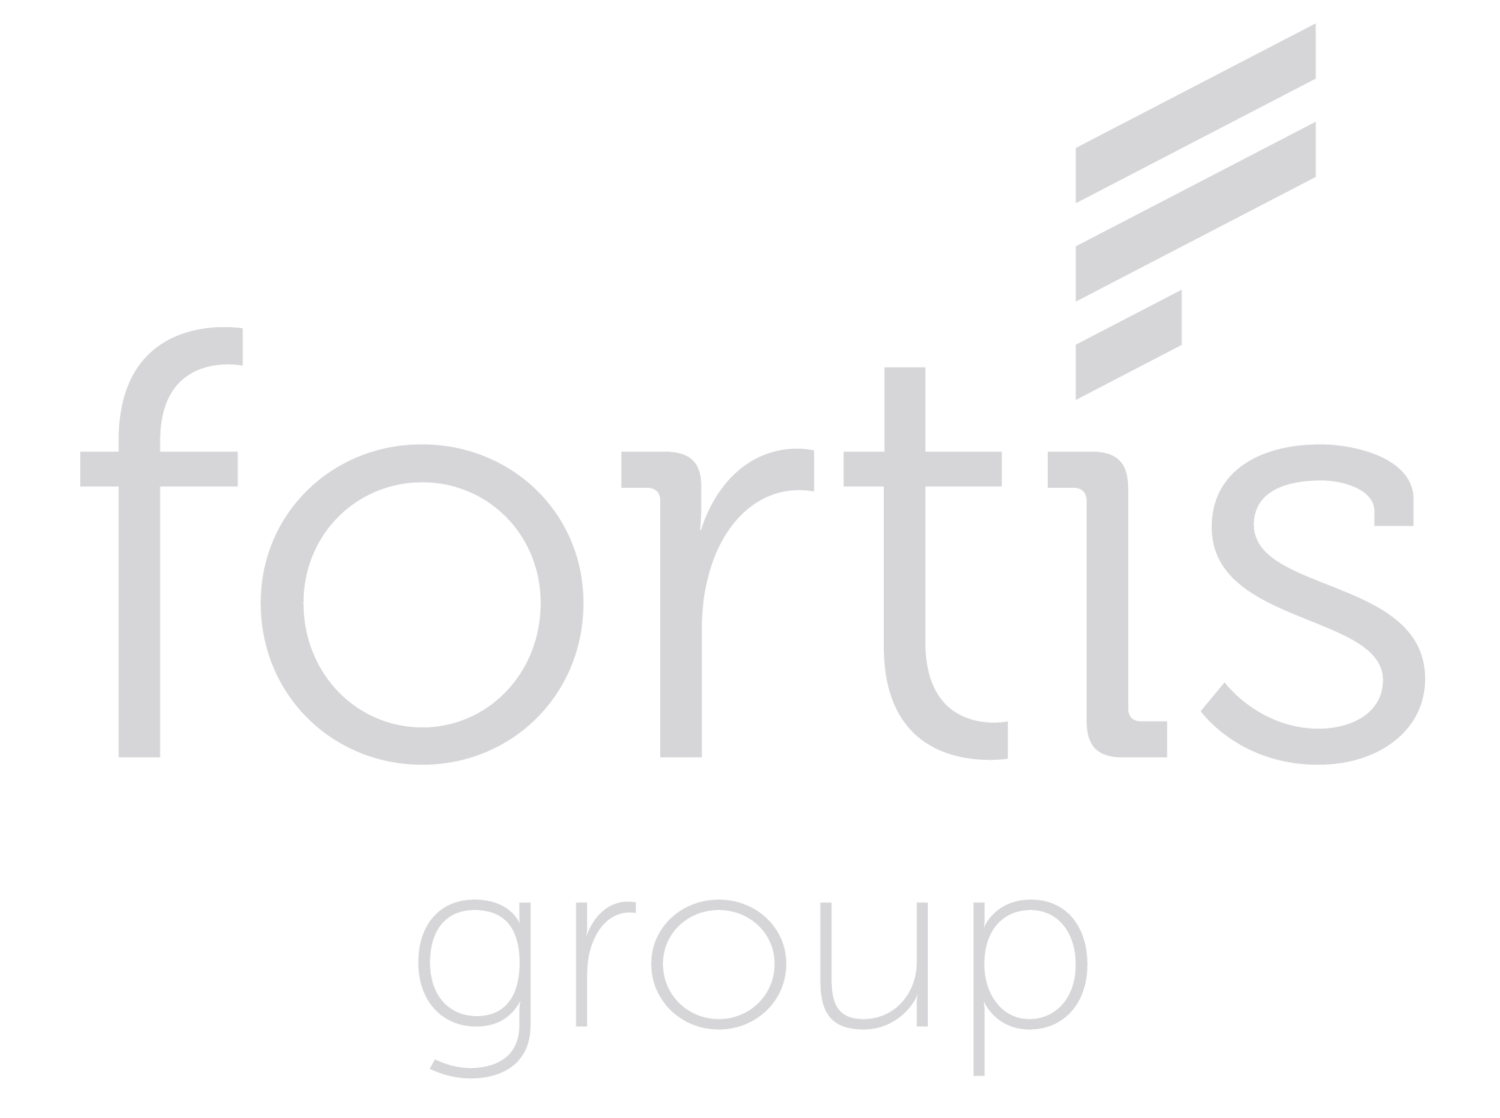 Fortis Group